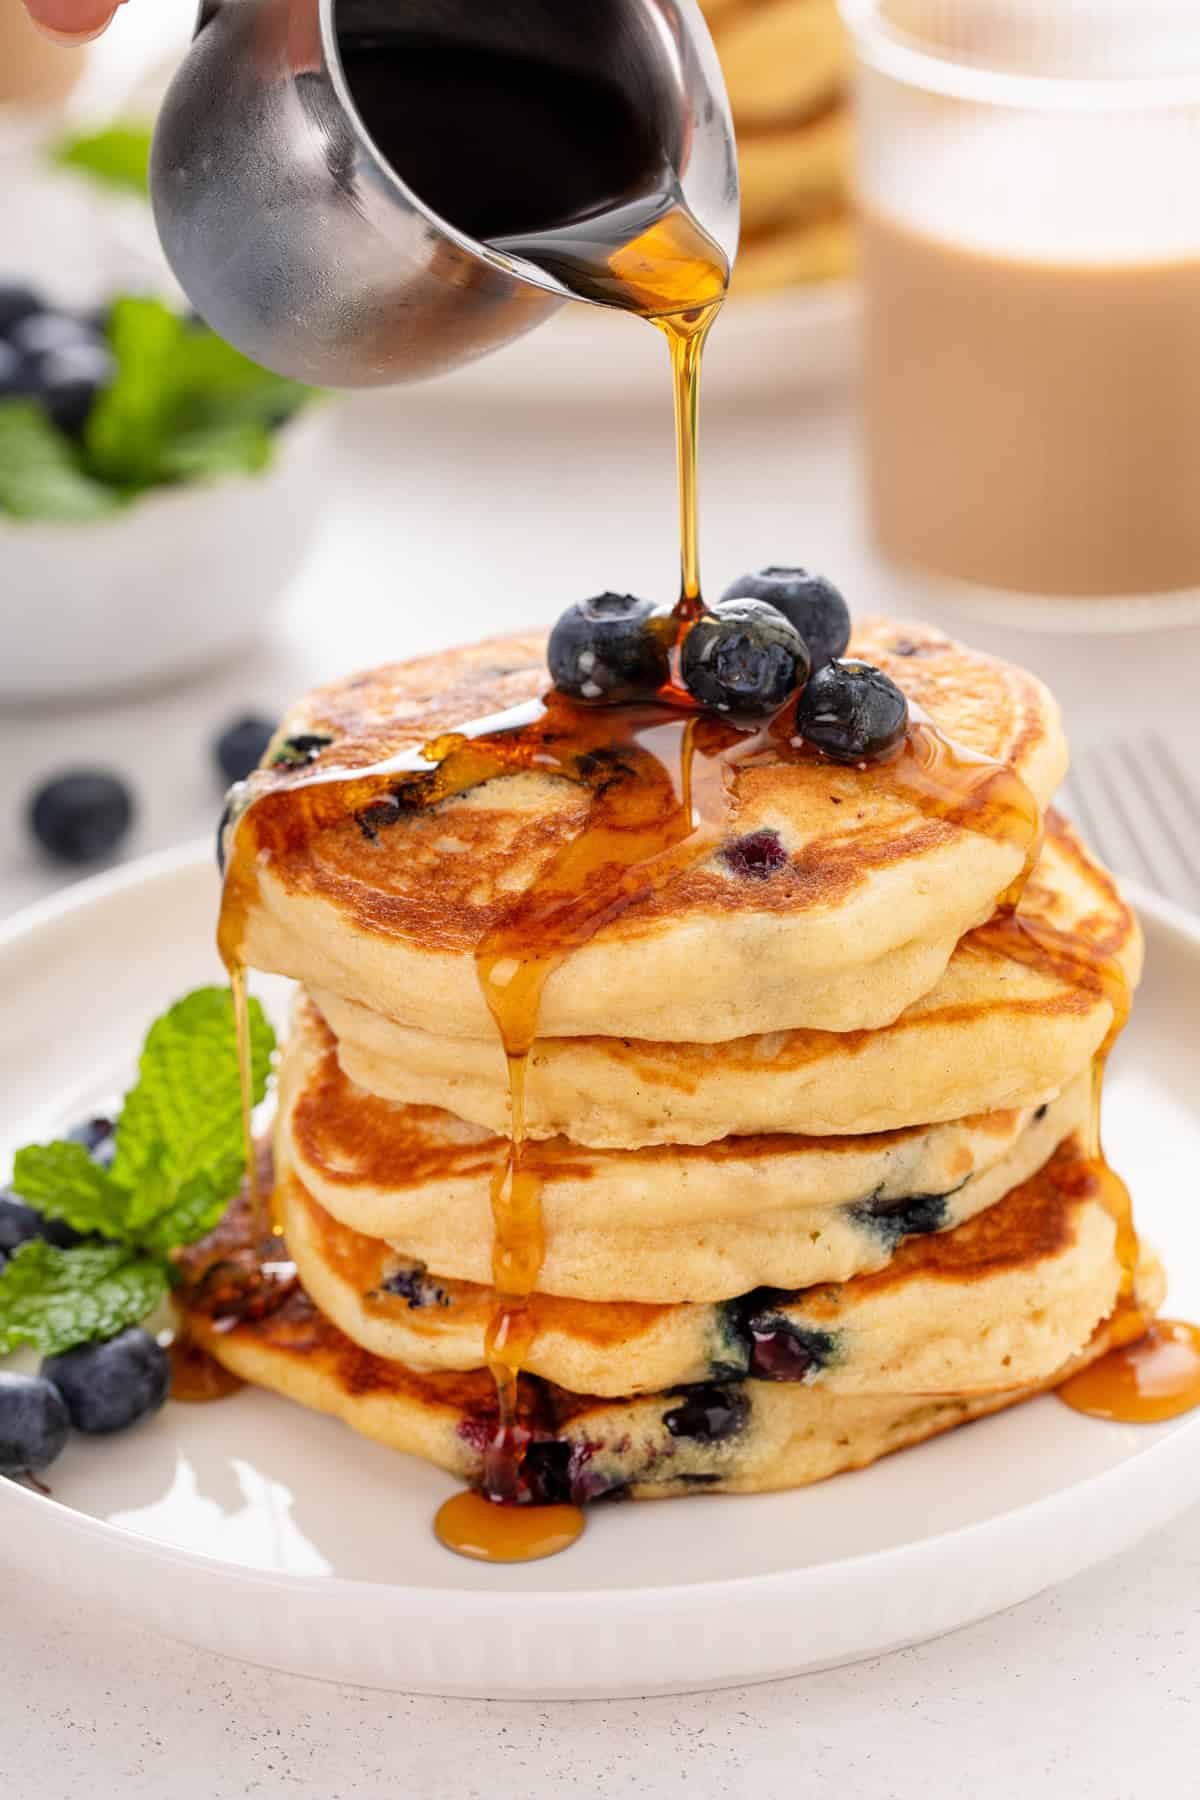 Syrup being poured over a stack of blueberry pancakes on a white plate.